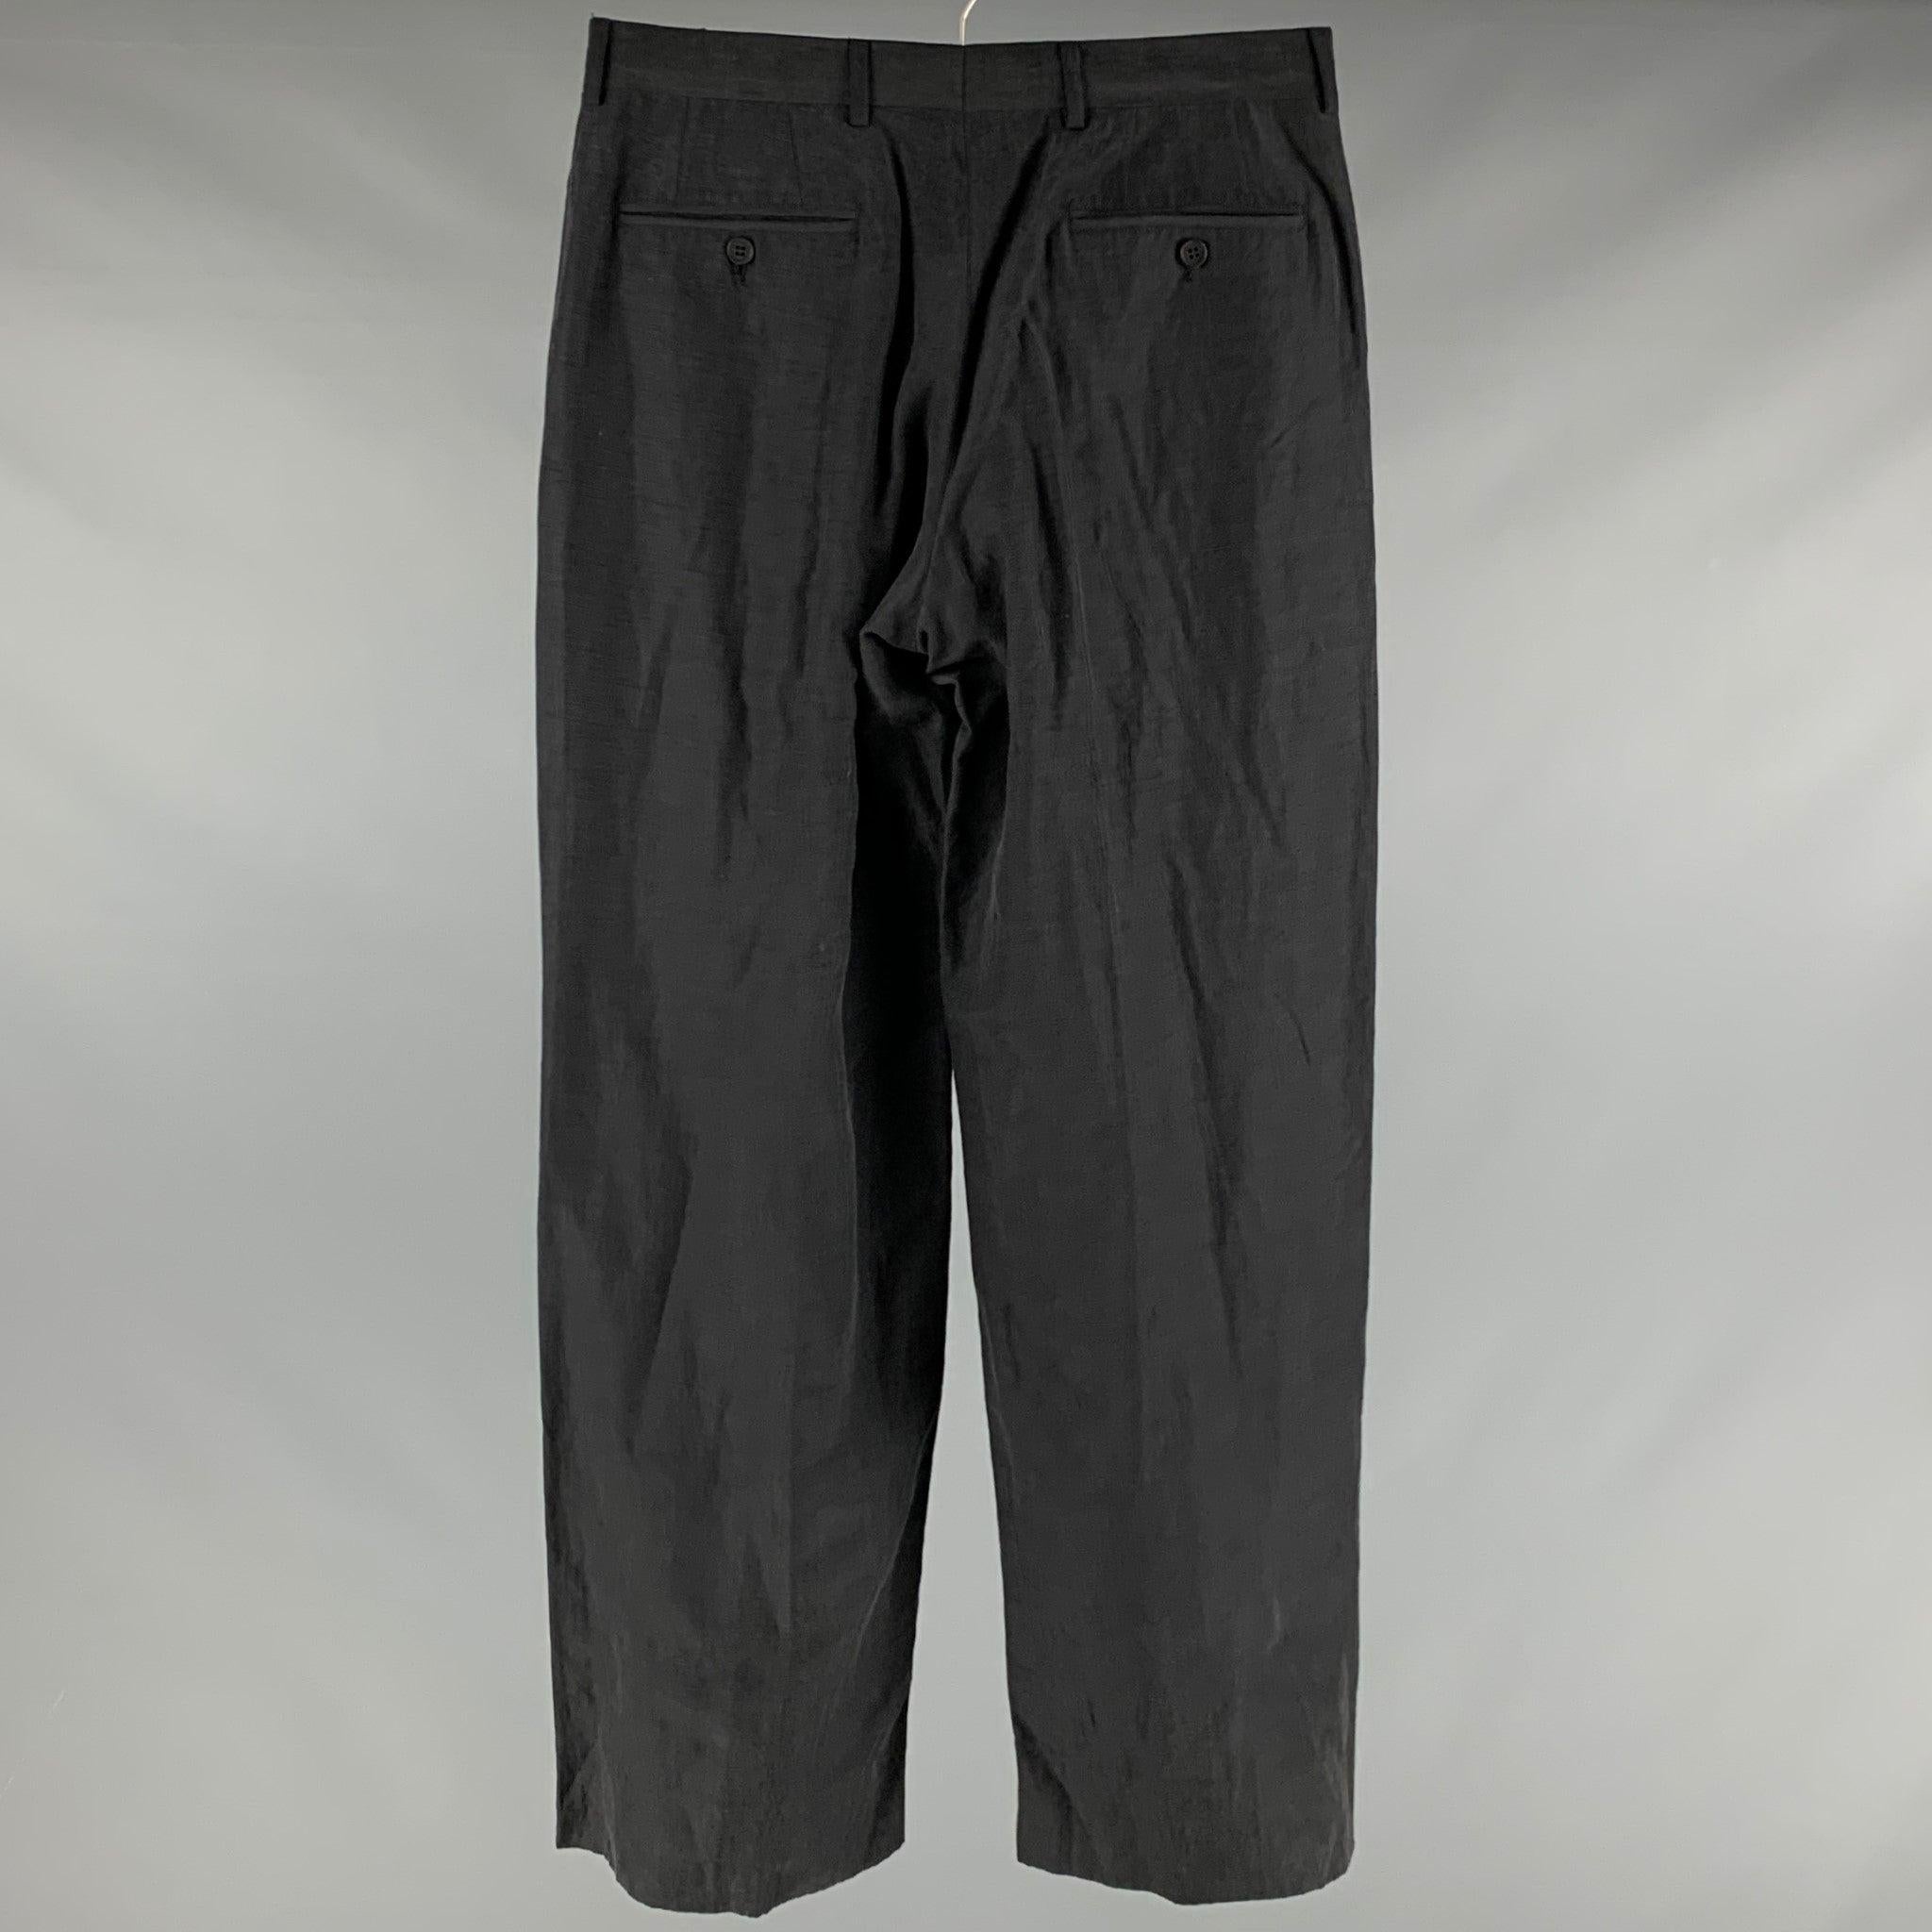 EMPORIO ARMANI dress pants
in a black linen silk blend fabric featuring wide leg style, four pockets, and a zip fly closure. Made in Italy.Very Good Pre-Owned Condition. Minor signs of wear. 

Marked:  IT 48 

Measurements: 
 Waist: 32 inches Rise: